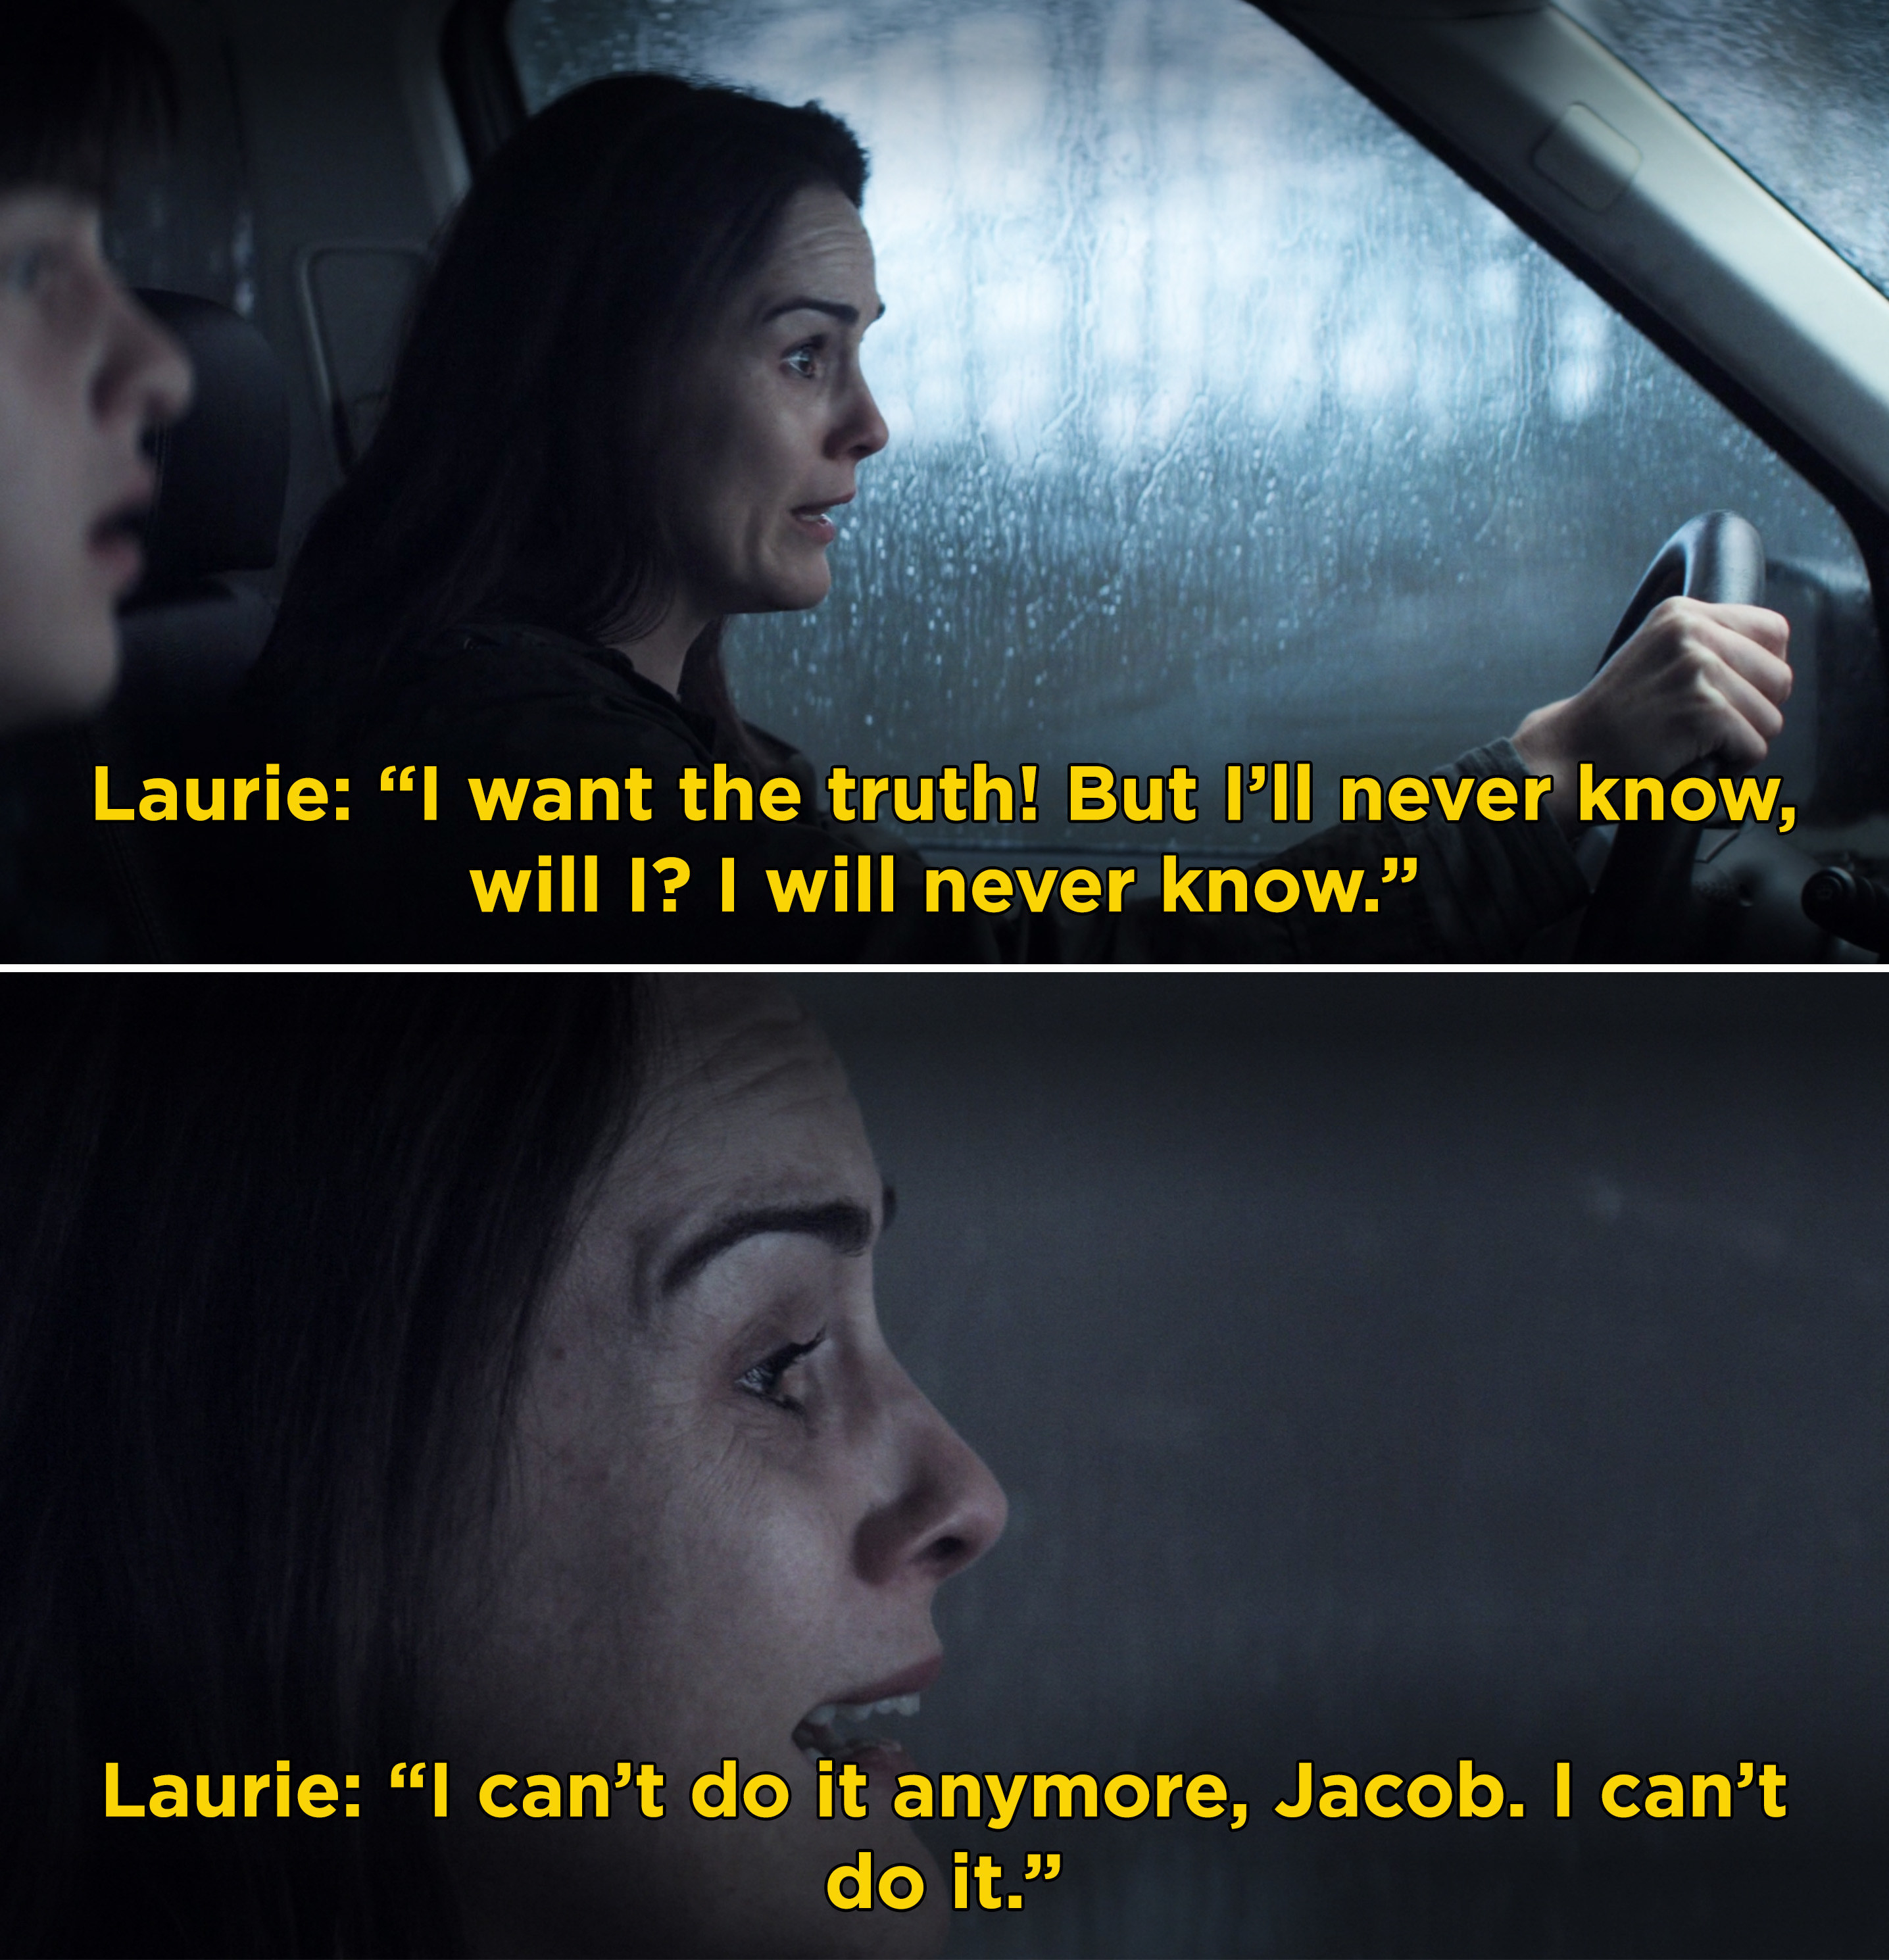 Laurie driving and saying she wants the truth from the death